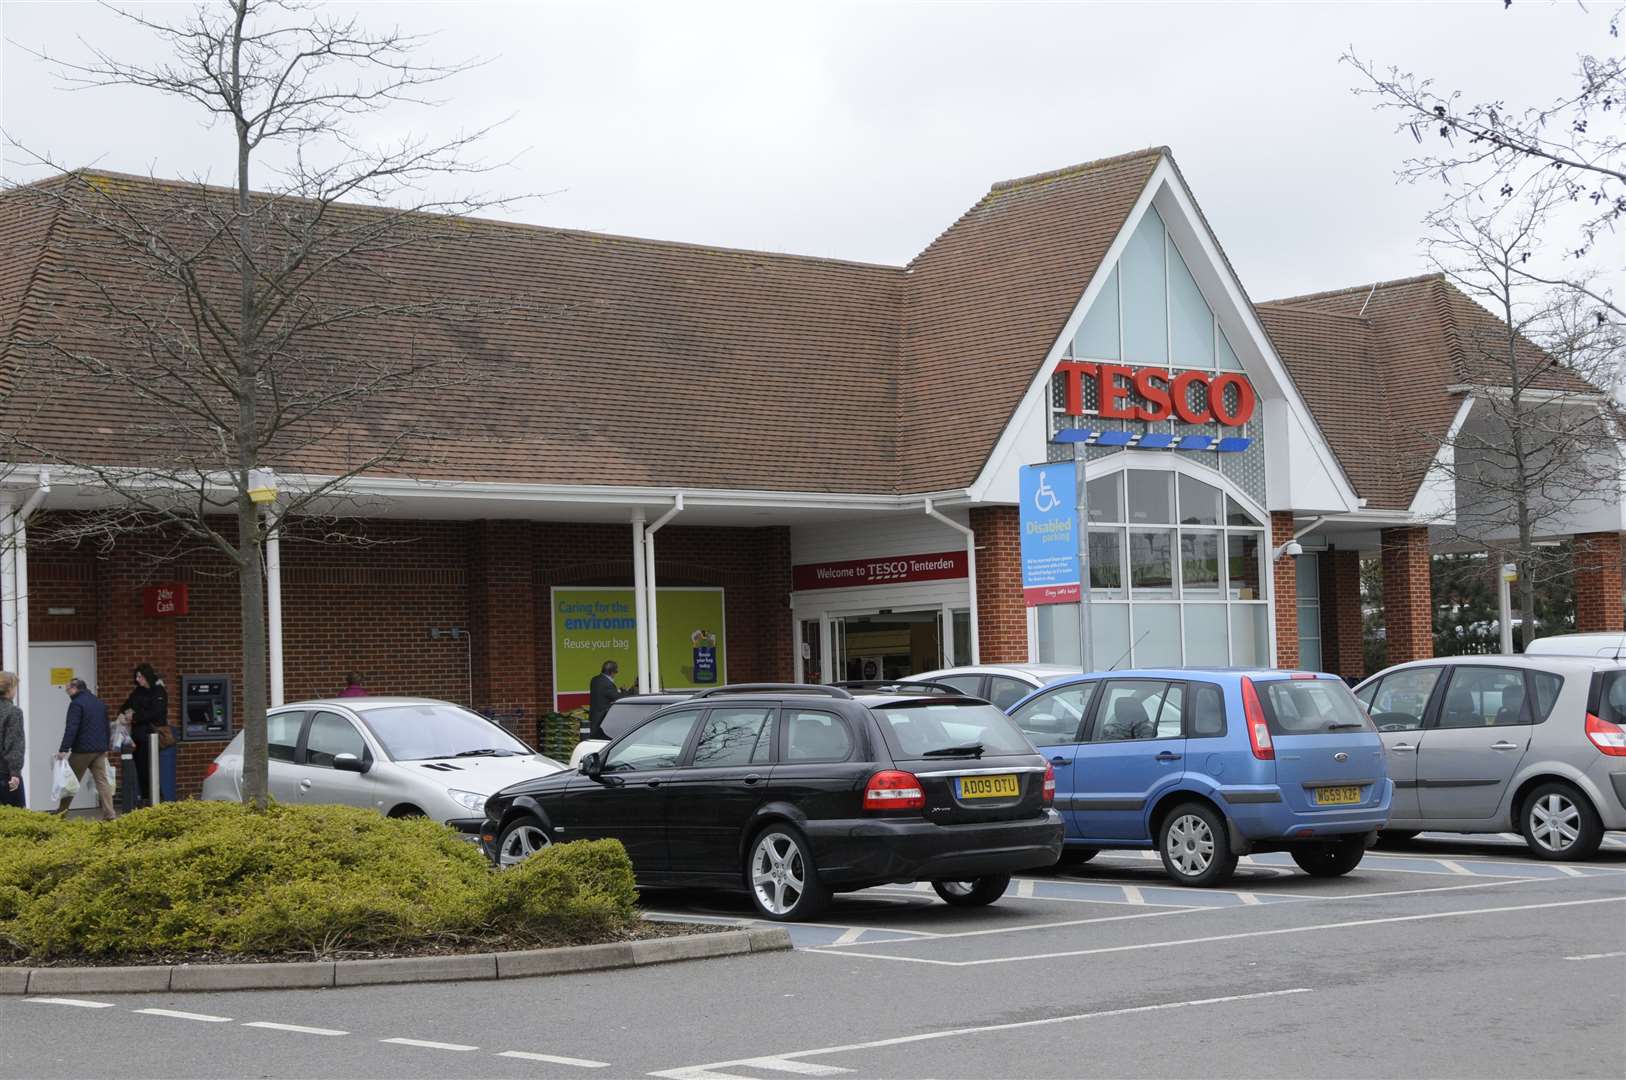 The Tesco store in Tenterden. Picture: Paul Amos